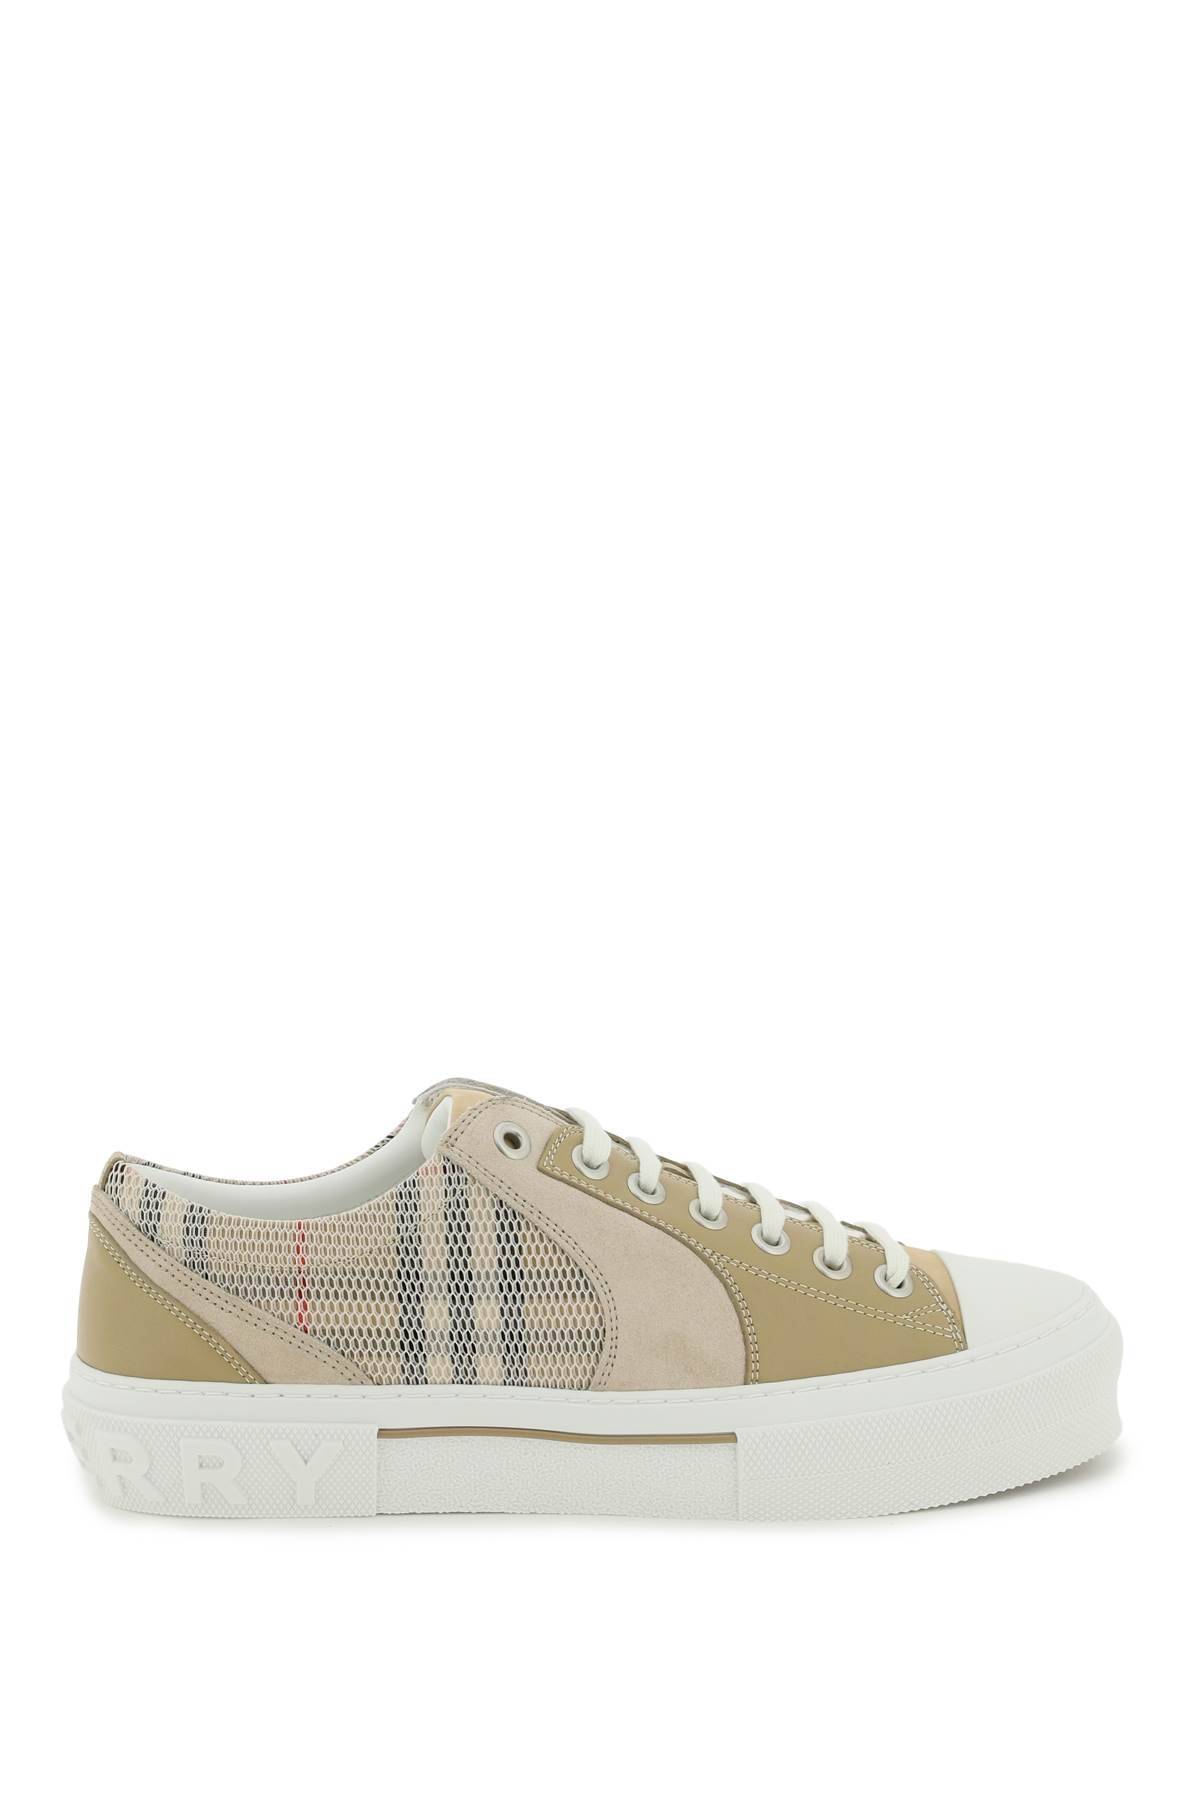 BURBERRY VINTAGE CHECK &AMP; LEATHER SNEAKERS